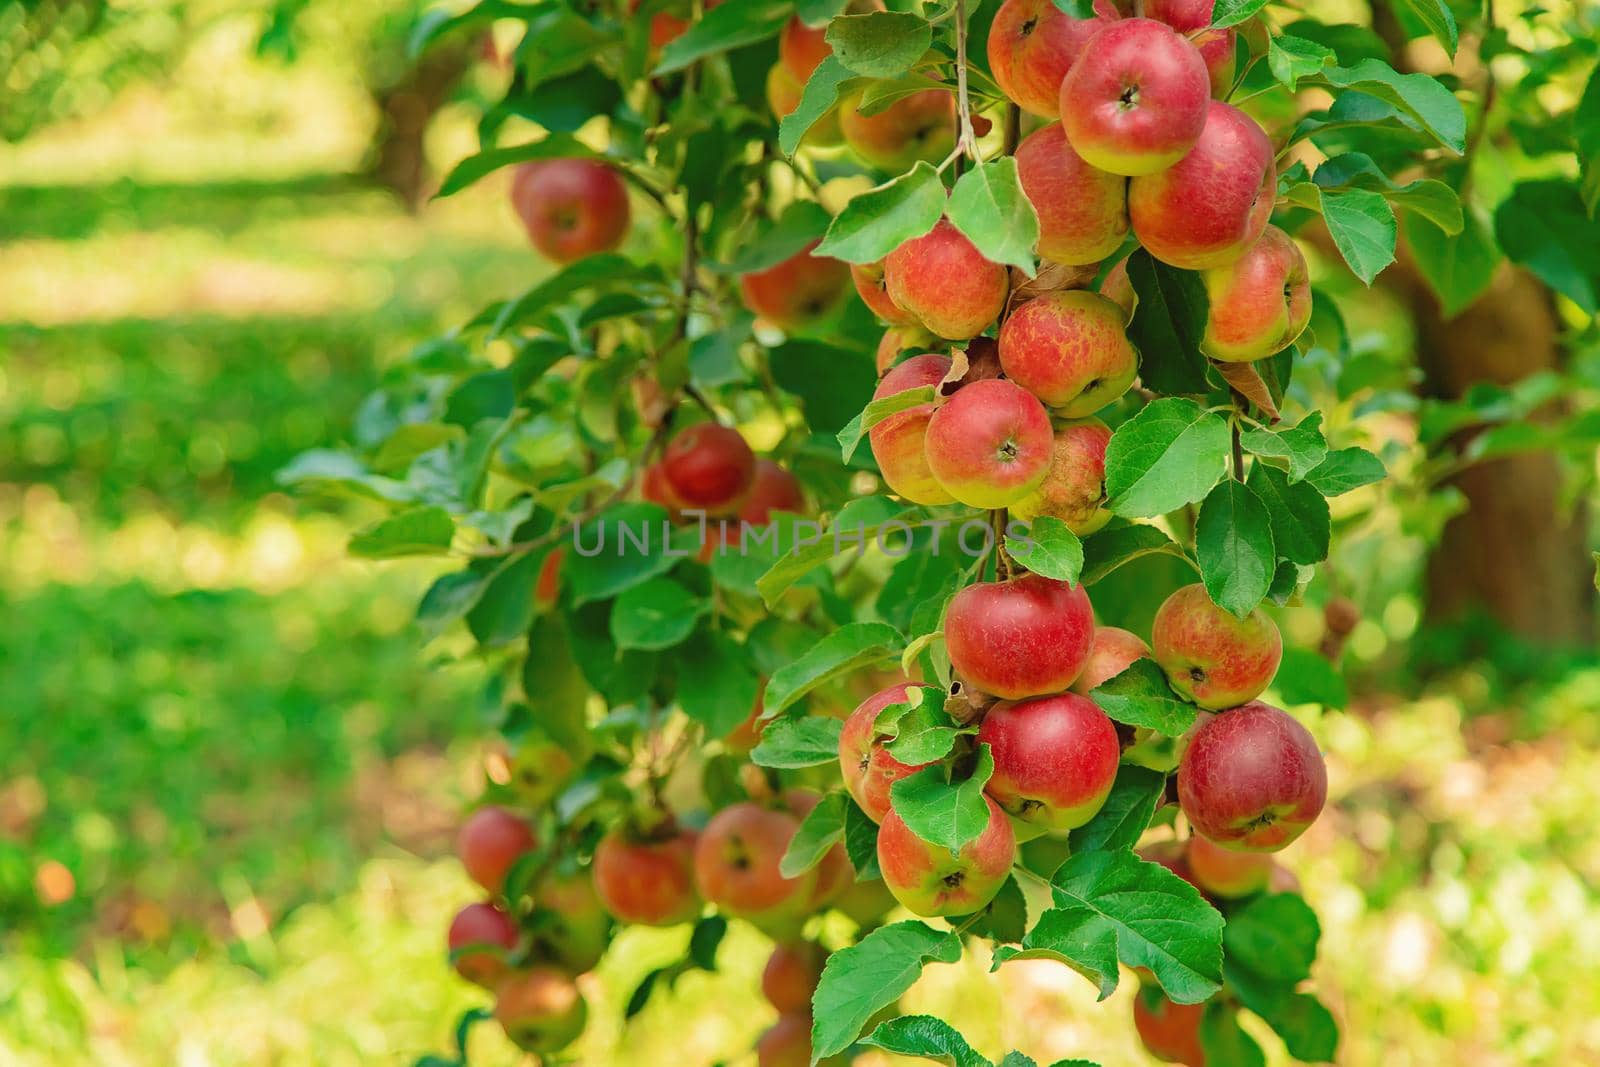 Apples on a tree in the garden. Selective focus. nature.